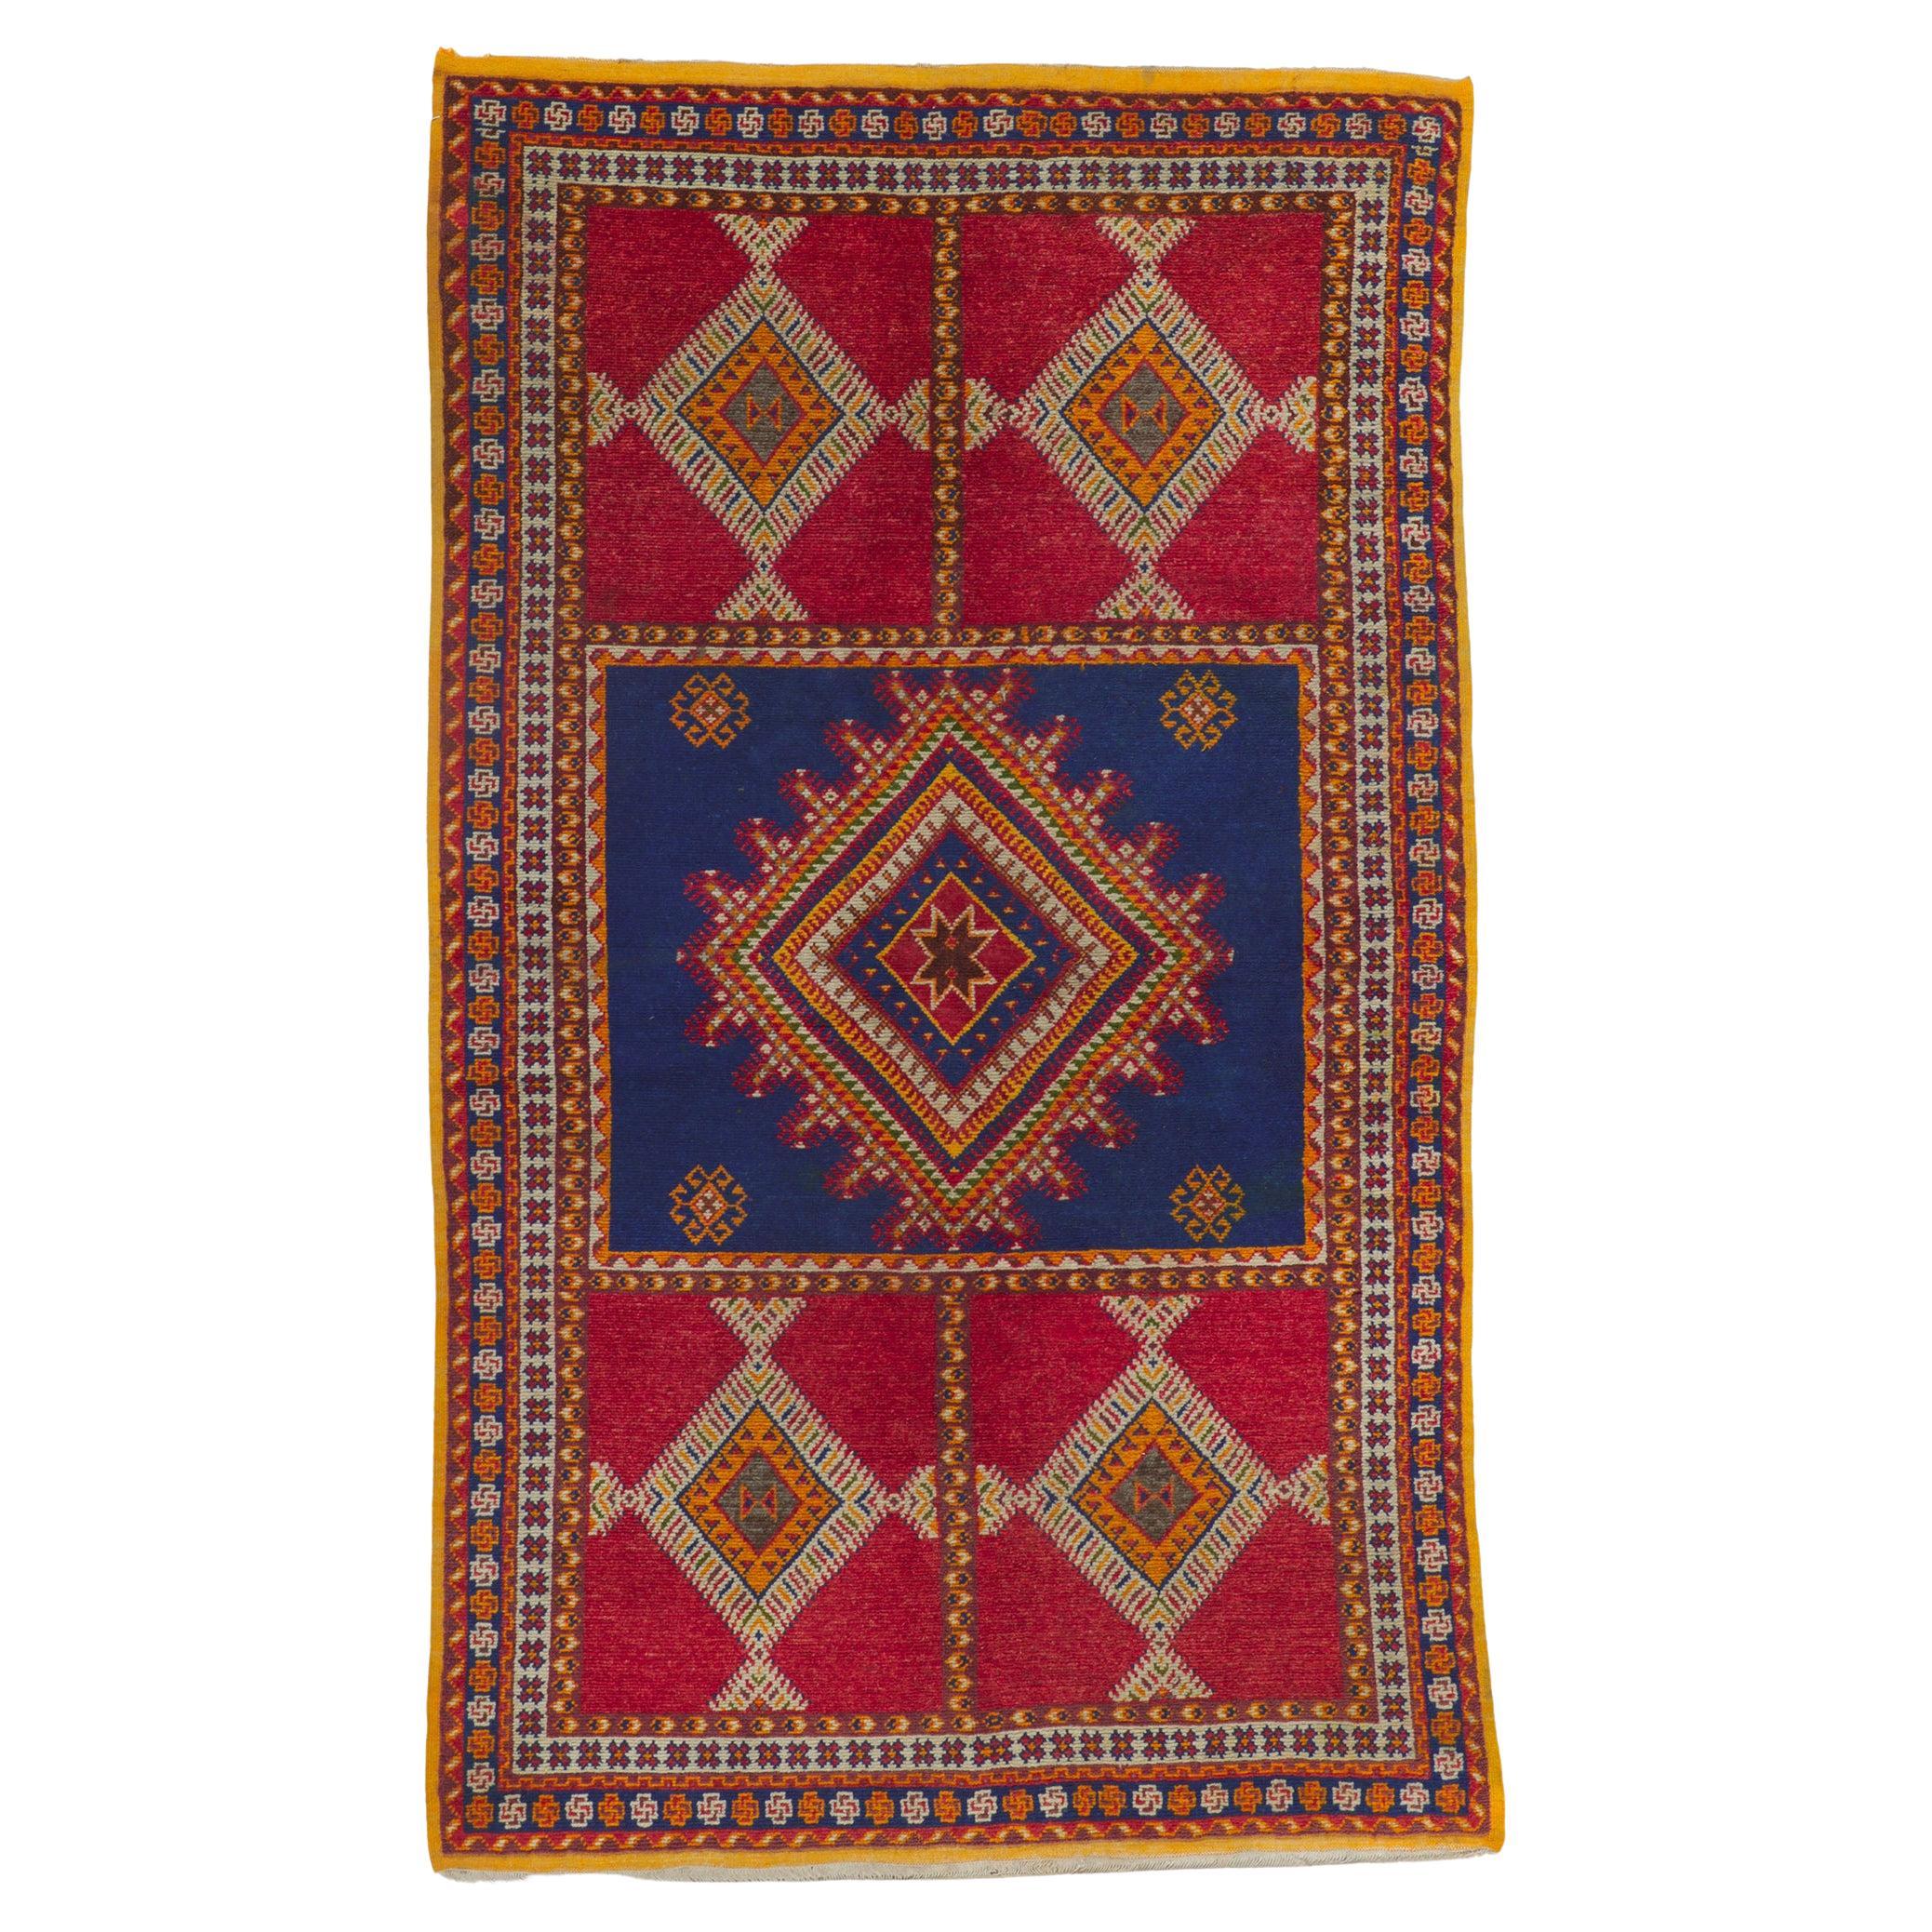 Vintage Taznakht Moroccan Rug by Berber Tribes of Morocco